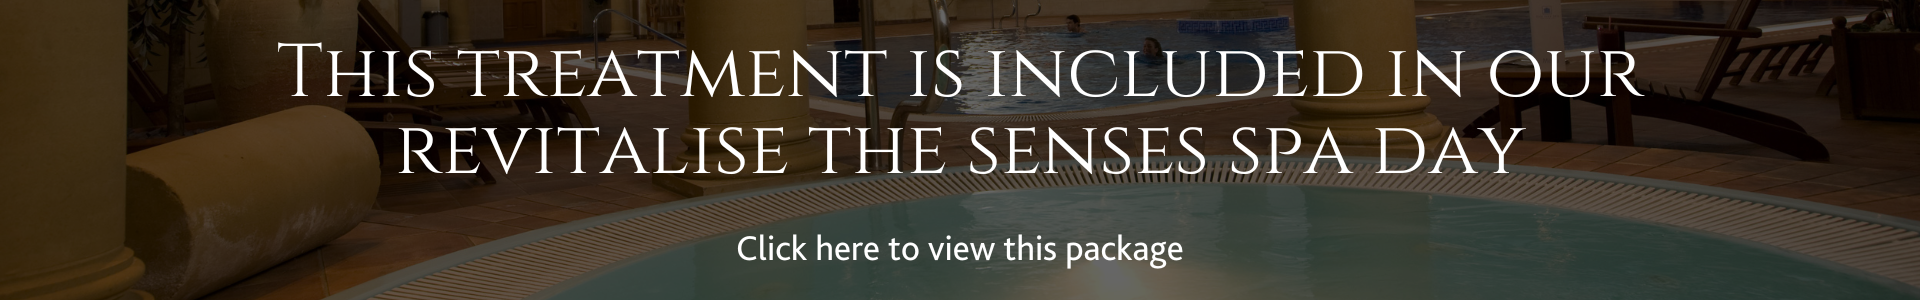 Included in our revitalise your senses spa day package